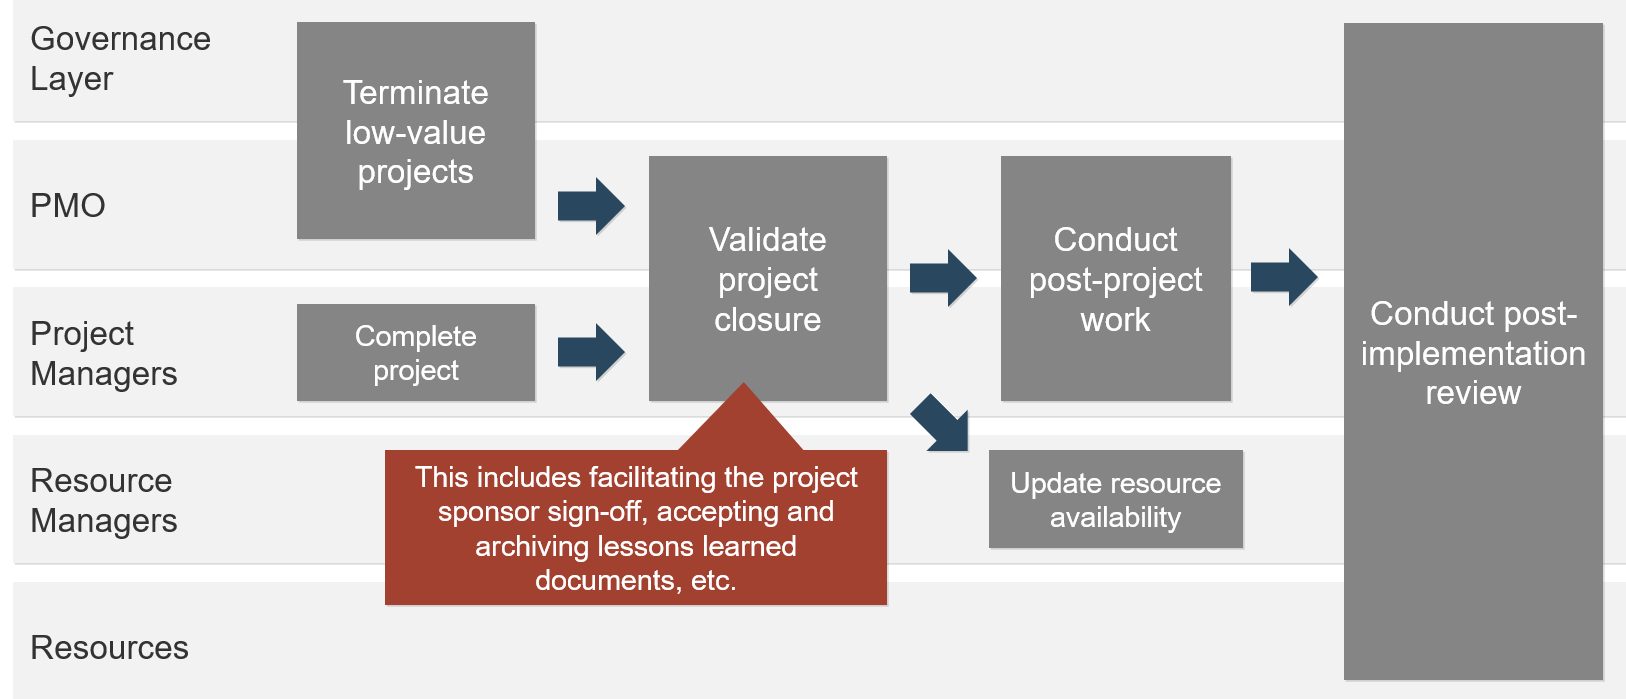 A diagram of Info-Tech's four-step process for project closure. There are five groups that may be involved in any one step, they are laid out on the side as row headers that each step's columns may fall into, 'Resources', 'Resource Managers', 'Project Managers', 'PMO', and 'Governance Layer'. The first steps are 'Complete project' which involves 'Project Managers', and 'Terminate low value projects' which involves 'PMO' and 'Governance layer'. Step 2 is 'Validate project closure' which involves 'Project Managers' and 'PMO', with a note that reads 'This includes facilitating the project sponsor sign-off, accepting and archiving lessons learned documents, etc.' The third steps are 'Conduct post-project work' which involves 'Project Managers' and 'PMO', and 'Update resource availability' which includes 'Resource Managers'. Step 4 is 'Conduct post-implementation review' which involves all groups.